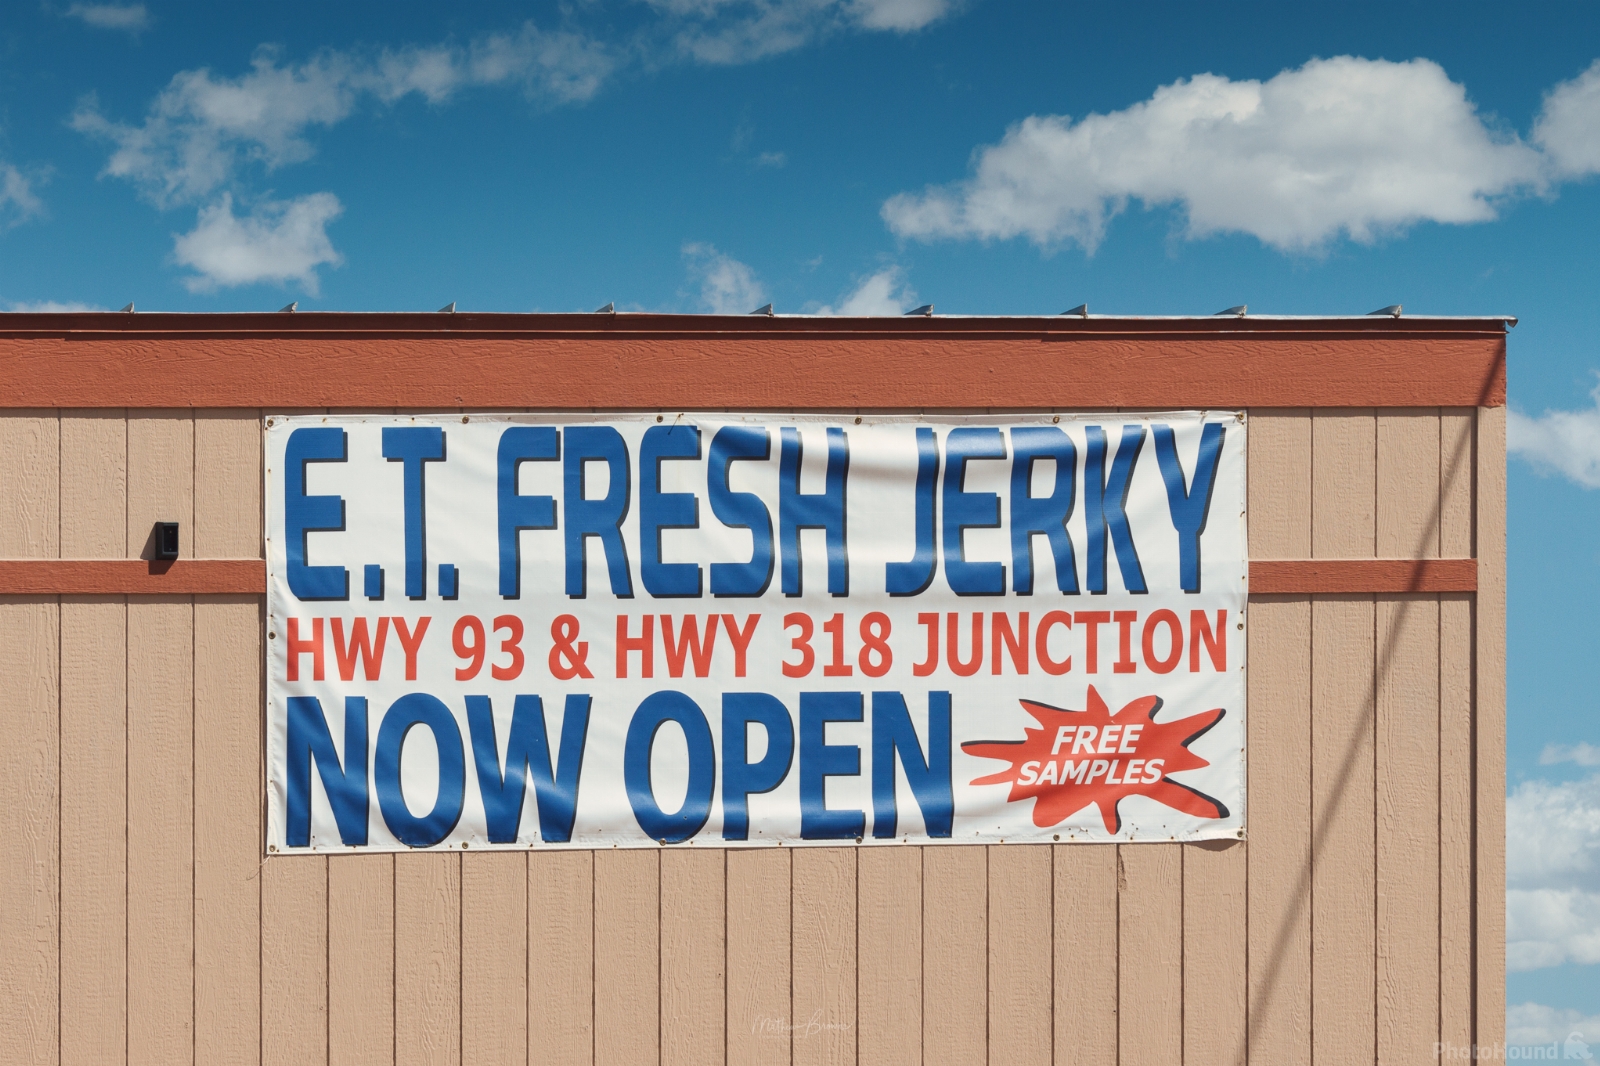 Image of ET Fresh Jerky by Mathew Browne